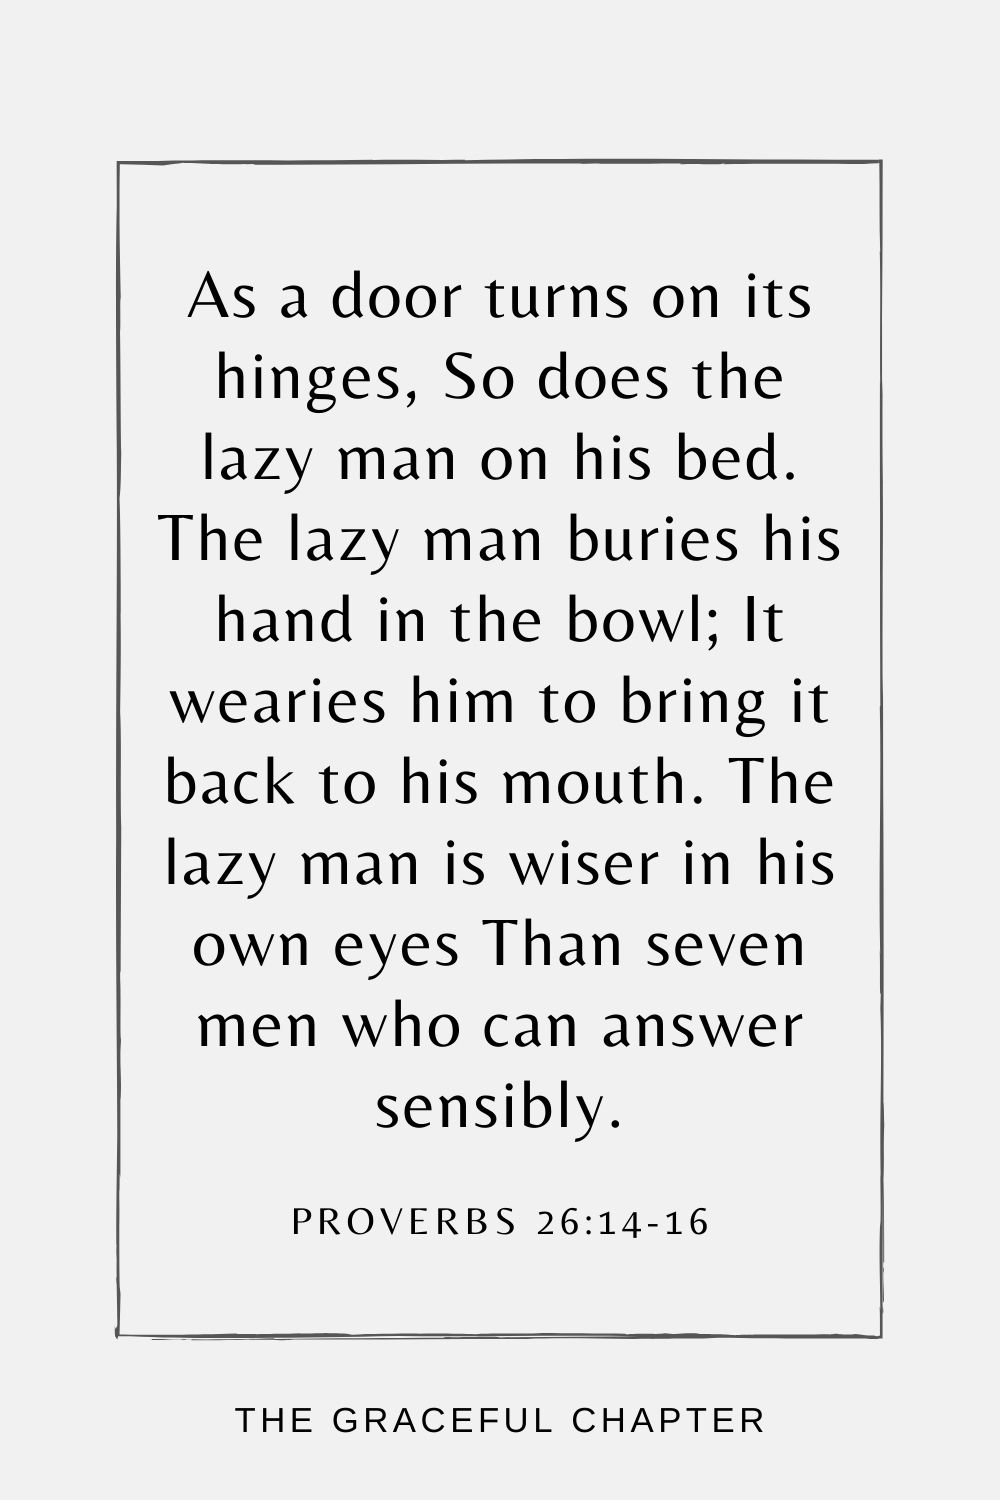 As a door turns on its hinges, So does the lazy man on his bed. The lazy man buries his hand in the bowl; It wearies him to bring it back to his mouth. The lazy man is wiser in his own eyes Than seven men who can answer sensibly. Proverbs 26:14-16